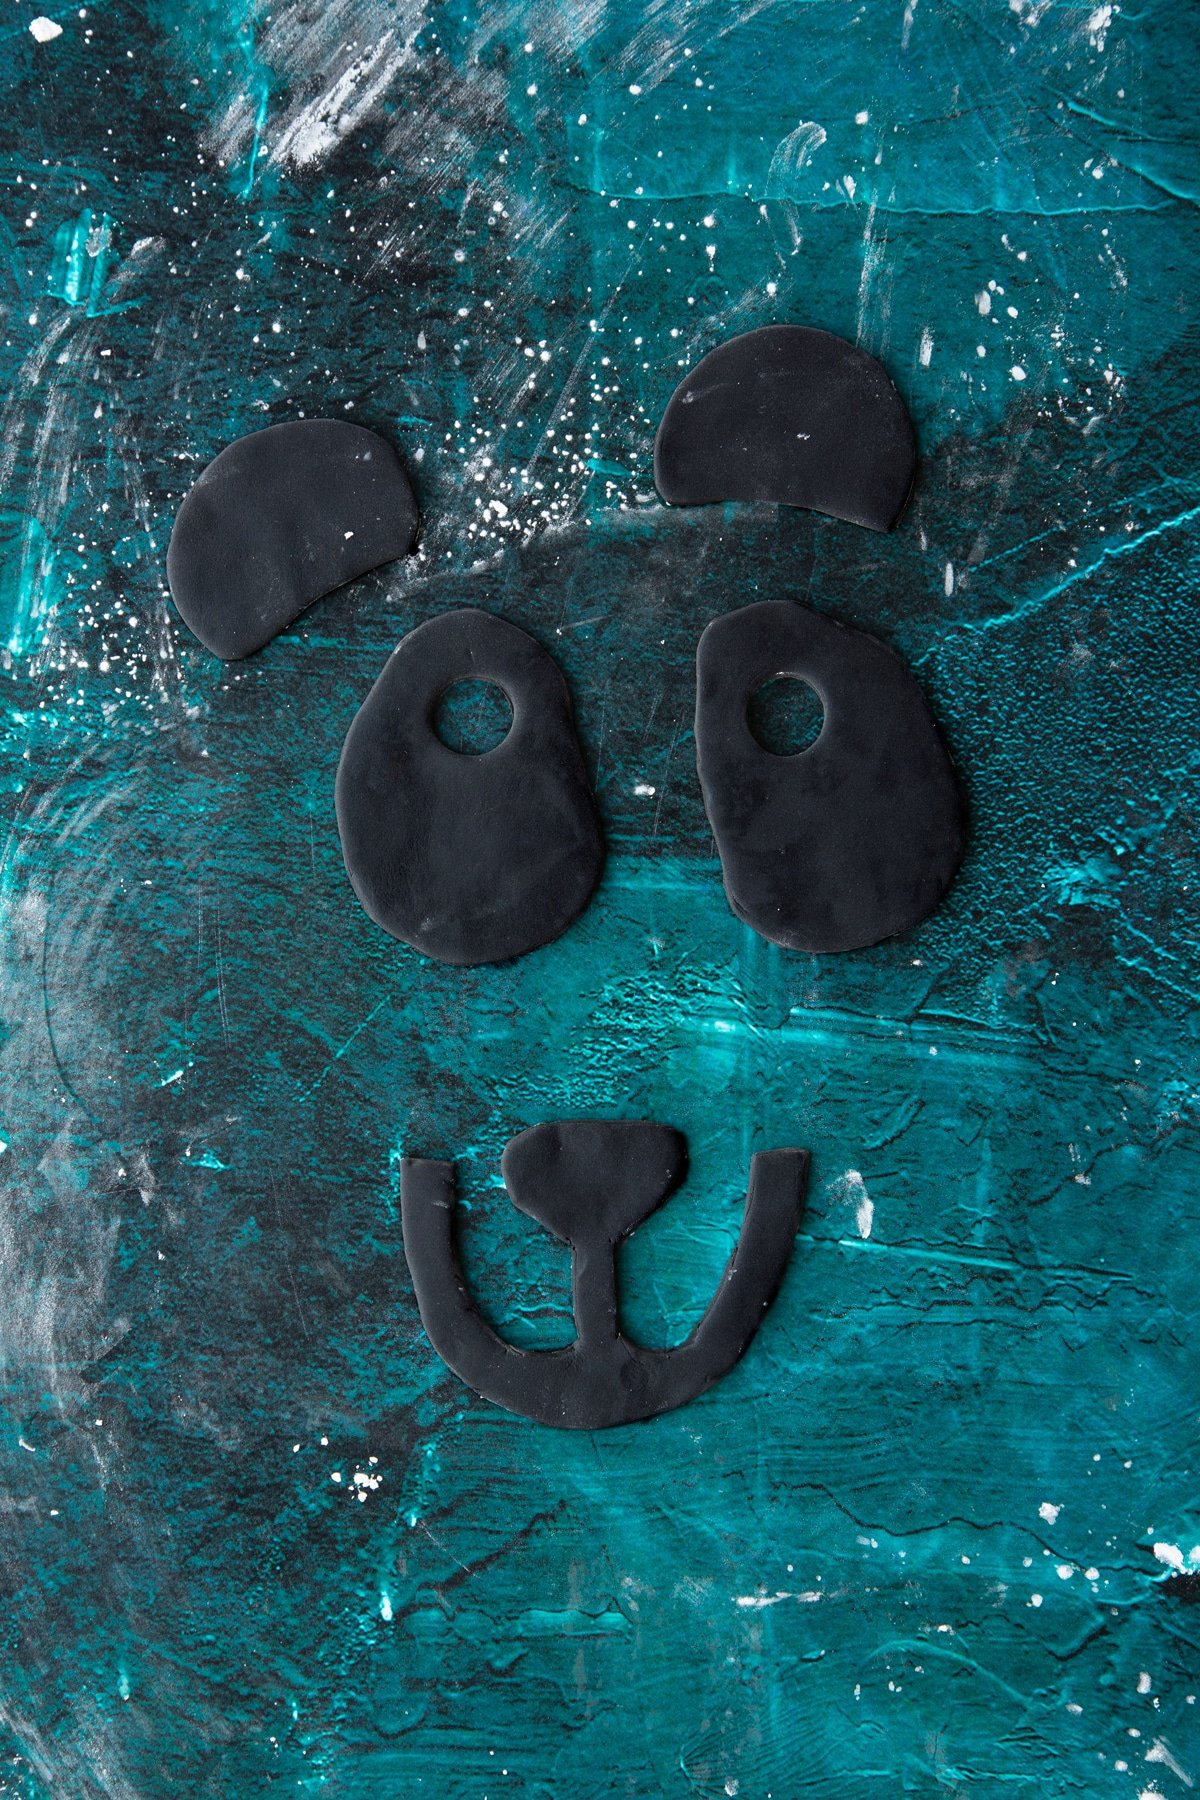 black royal icing panda features on a green marble background.